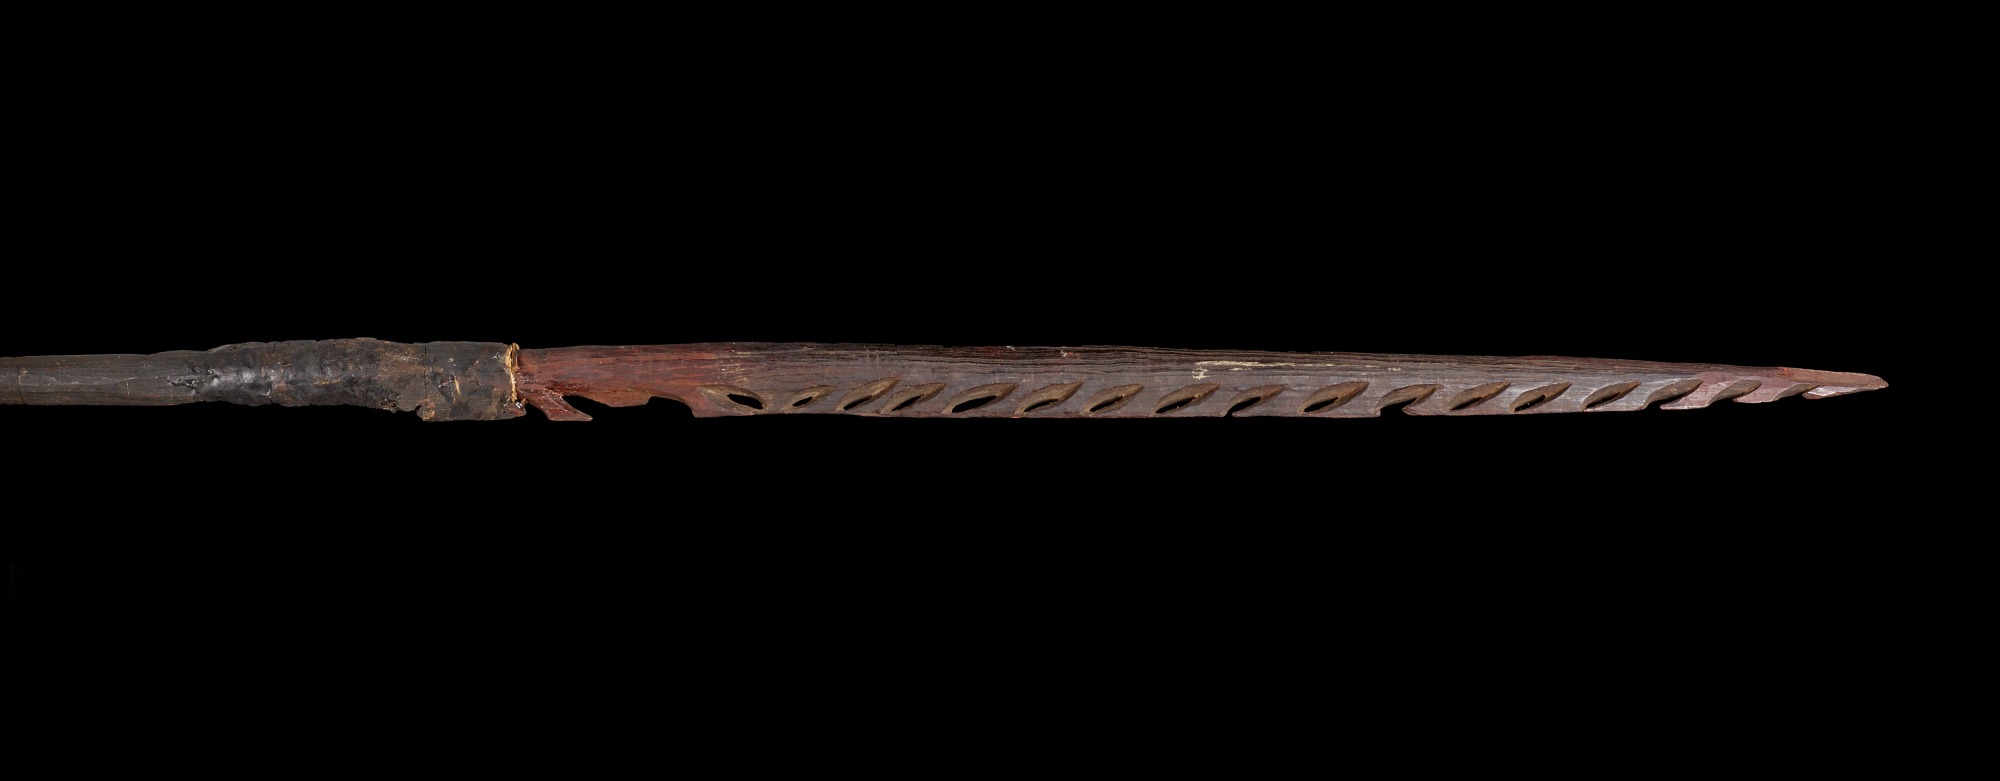 <p>Ceremonial spear made by the Yolngu people, collected from Makassar in 1879</p>
